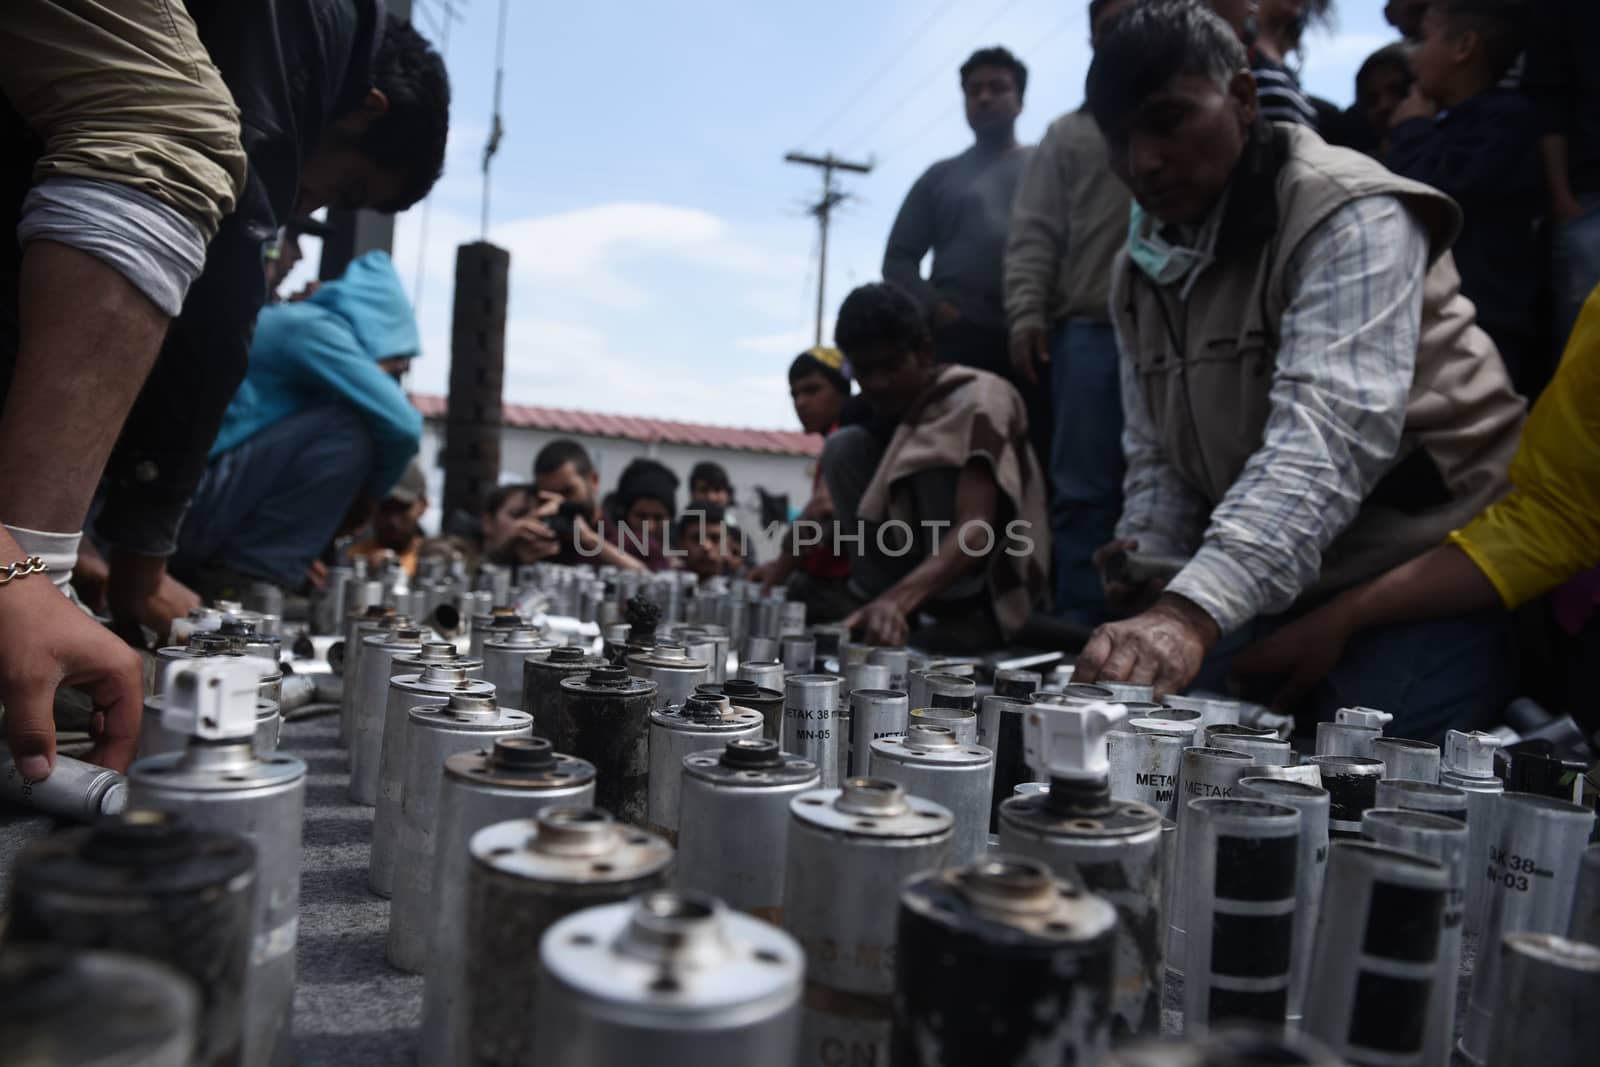 GREECE, Idomeni: Migrants collect tear gas canisters on April 11, 2016 that were used against them by Macedonian security forces the day prior as they attempted to cross the border.Hundreds of migrants were injured on Sunday as they attempted to cross the border into Macedonia. Police used tear gas, water cannons, and stun grenades to disperse the crowd as migrants threw stones in retaliation. 